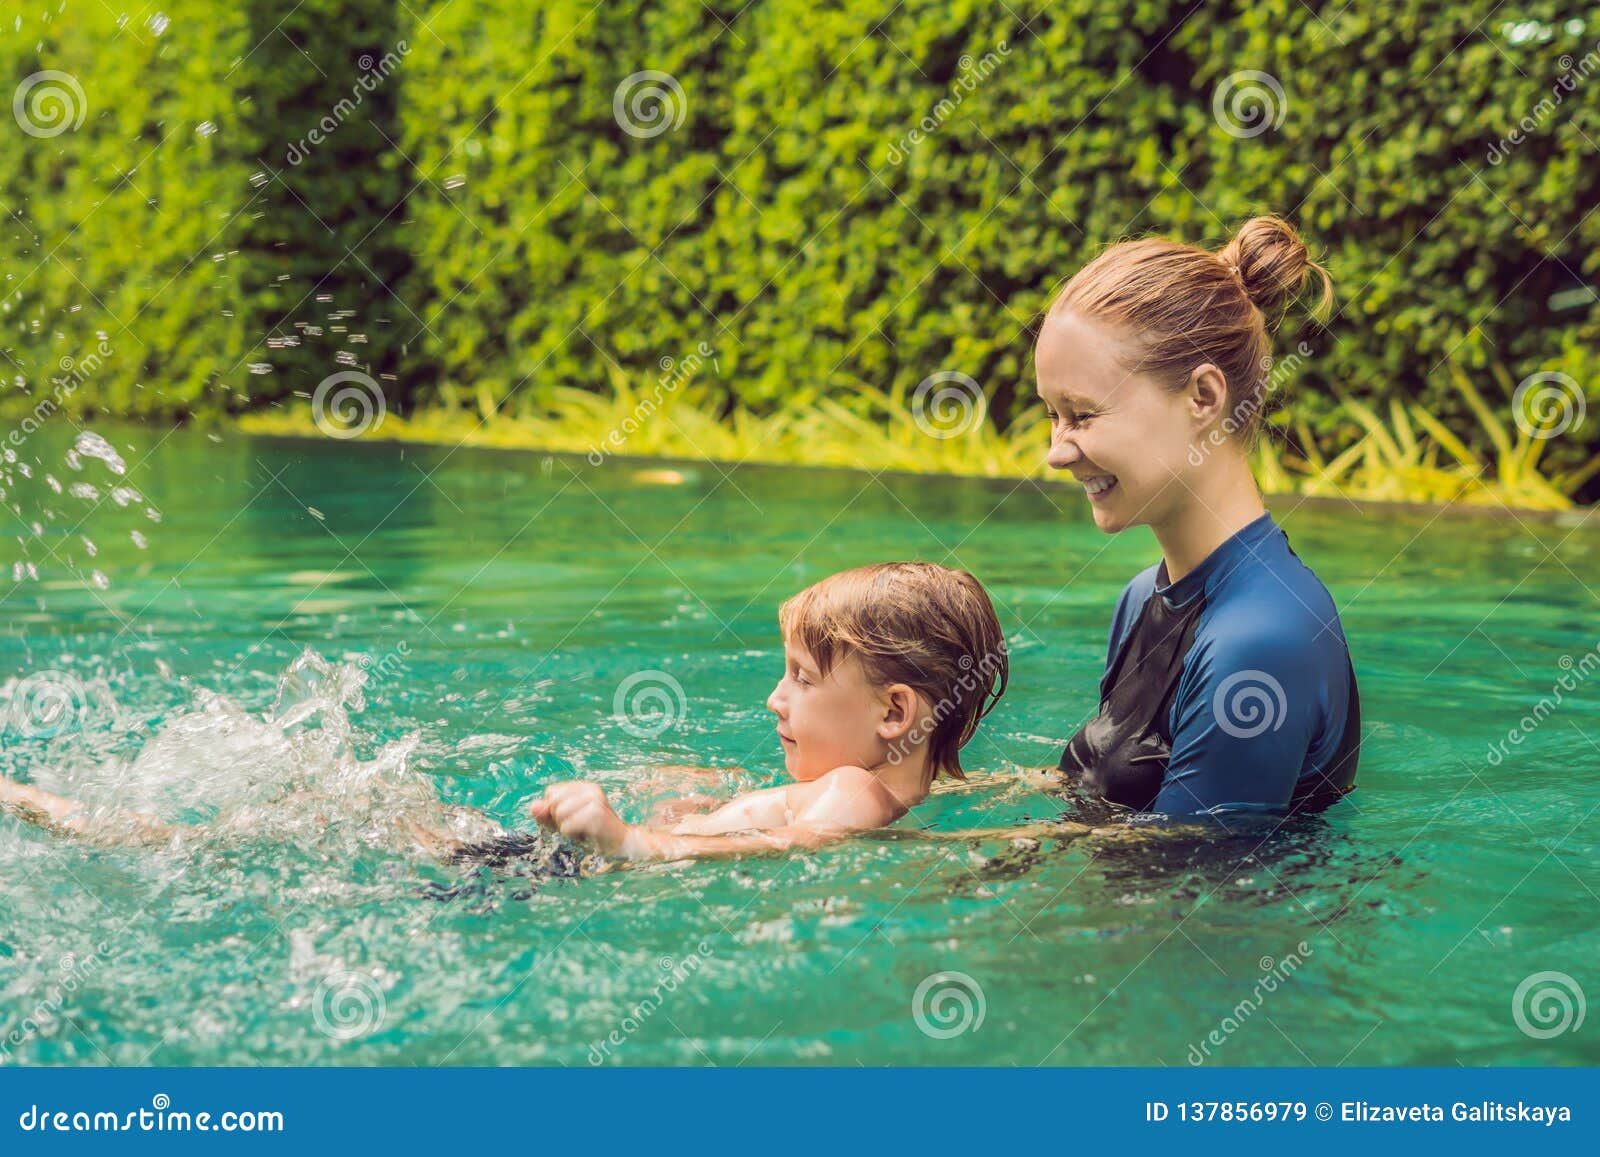 woman swimming instructor for children is teaching a happy boy to swim in the pool